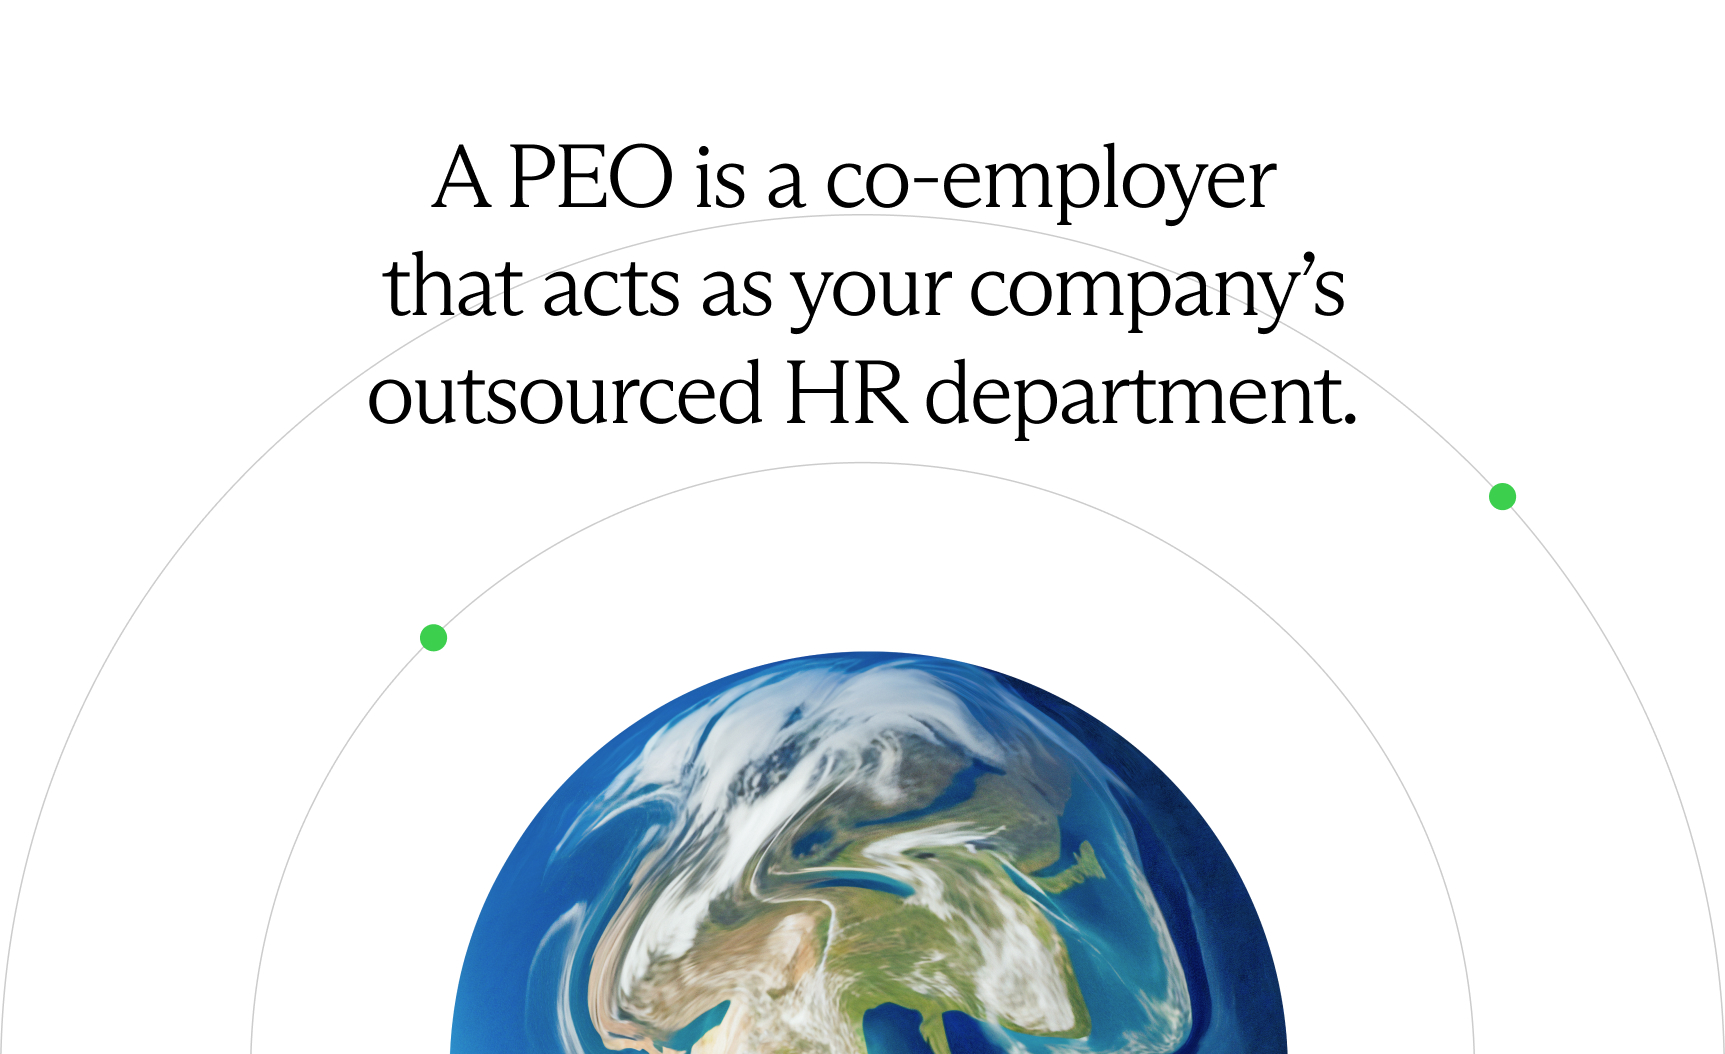 A PEO is a co-employer that acts as your company's outsourced HR department